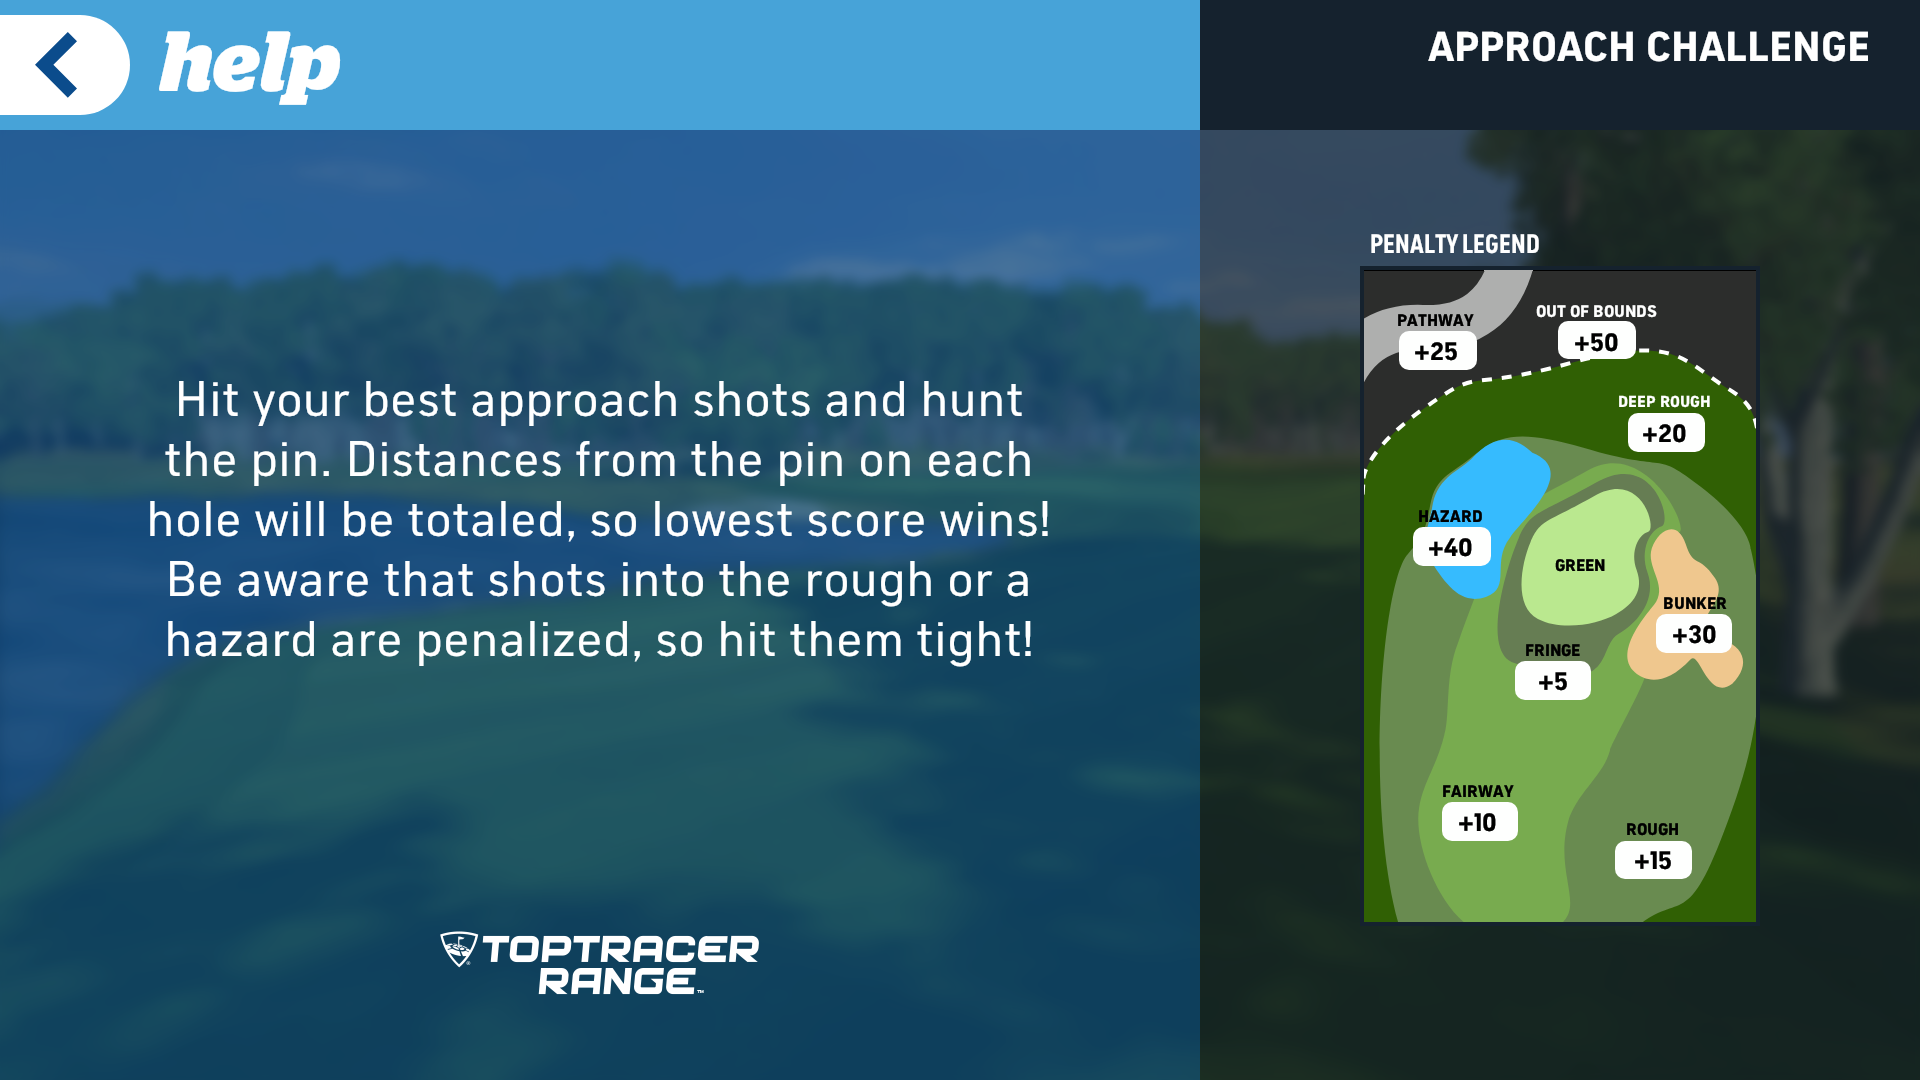 Approach Challenge